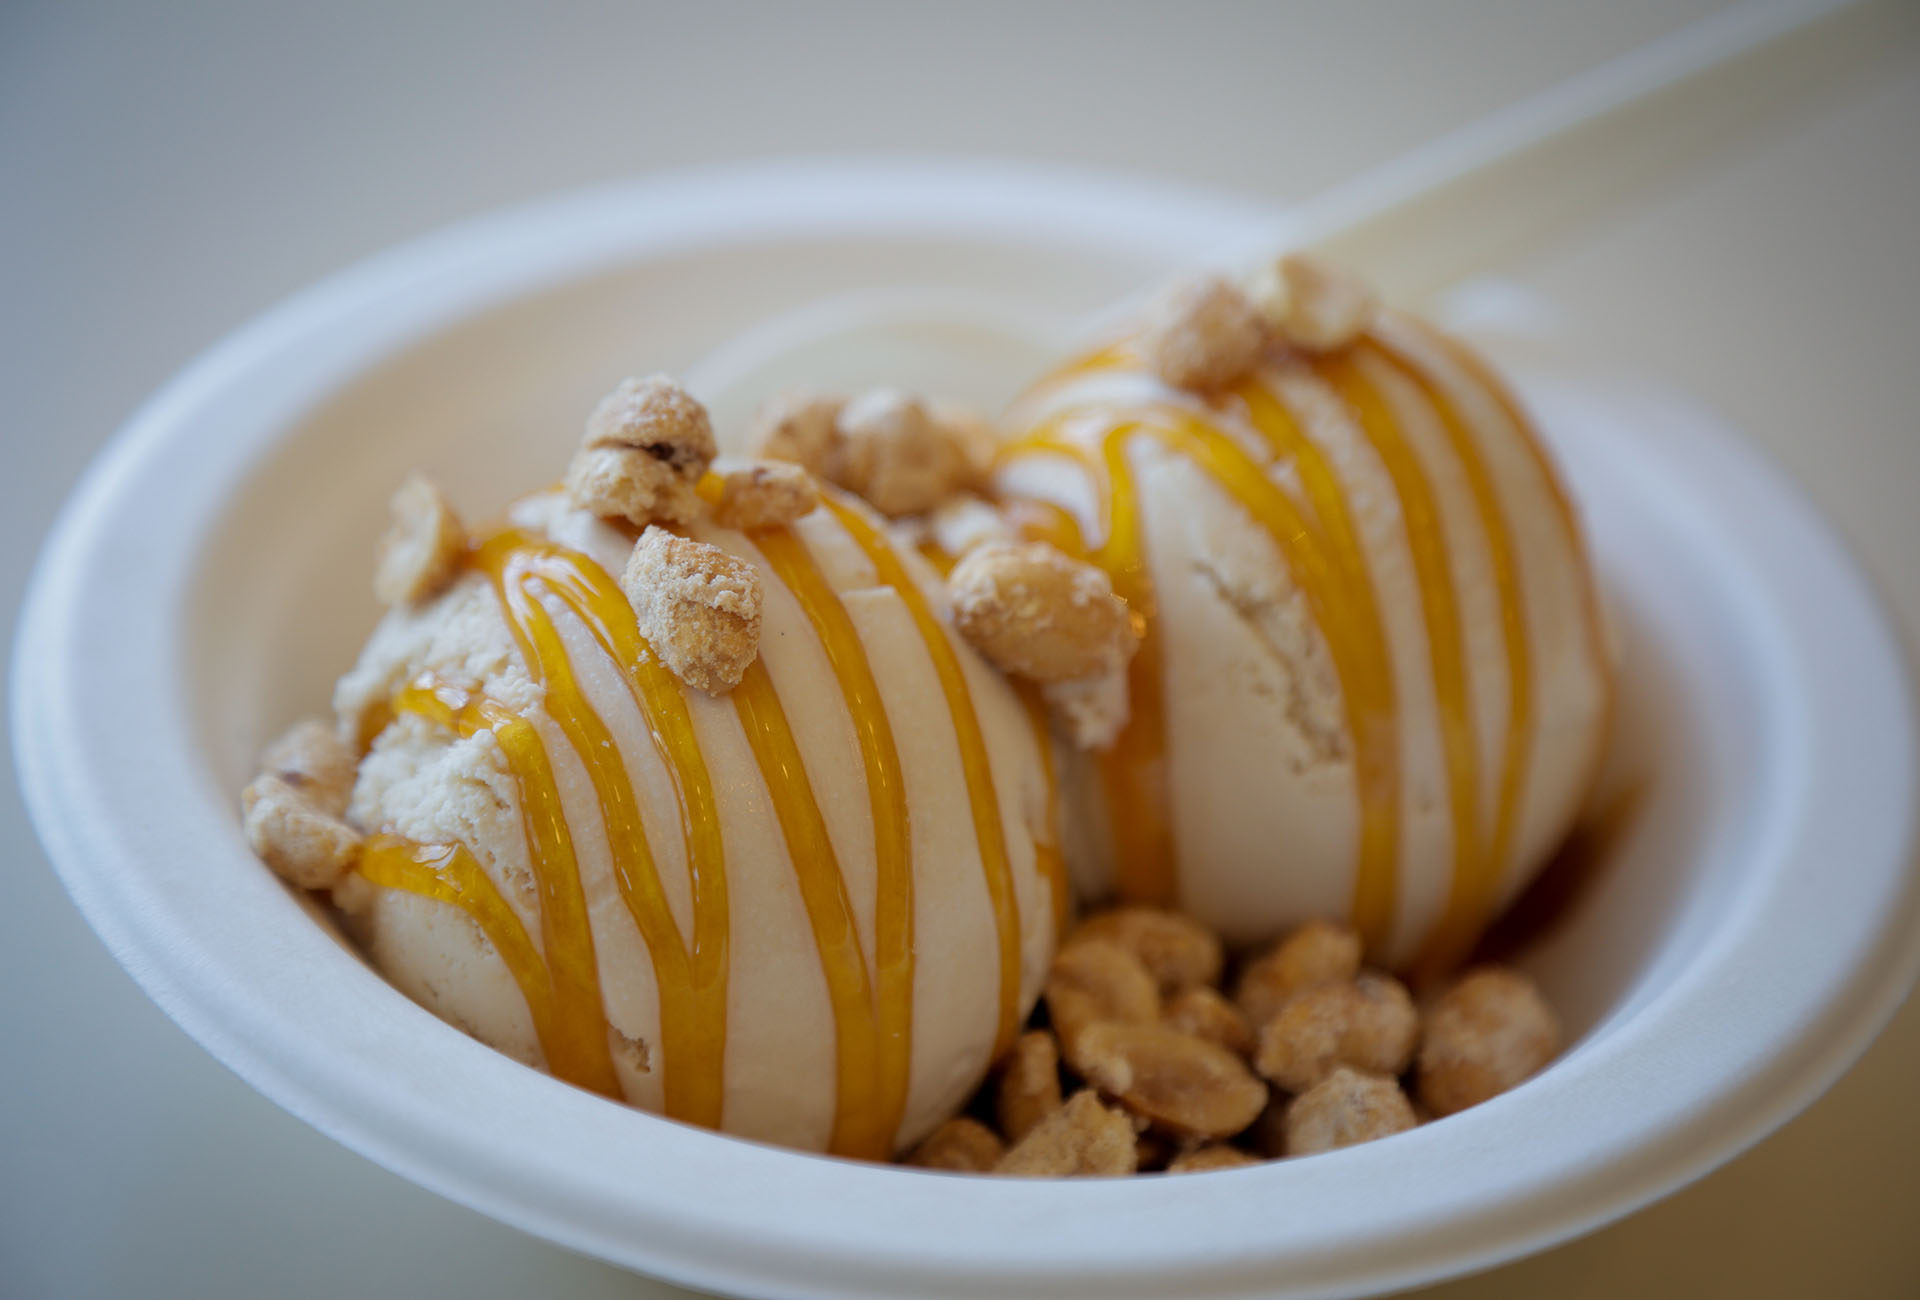 The Whos Your Daddy Sundae, made with beer ice cream, house-made frosted peanuts and bourbon caramel sauce.